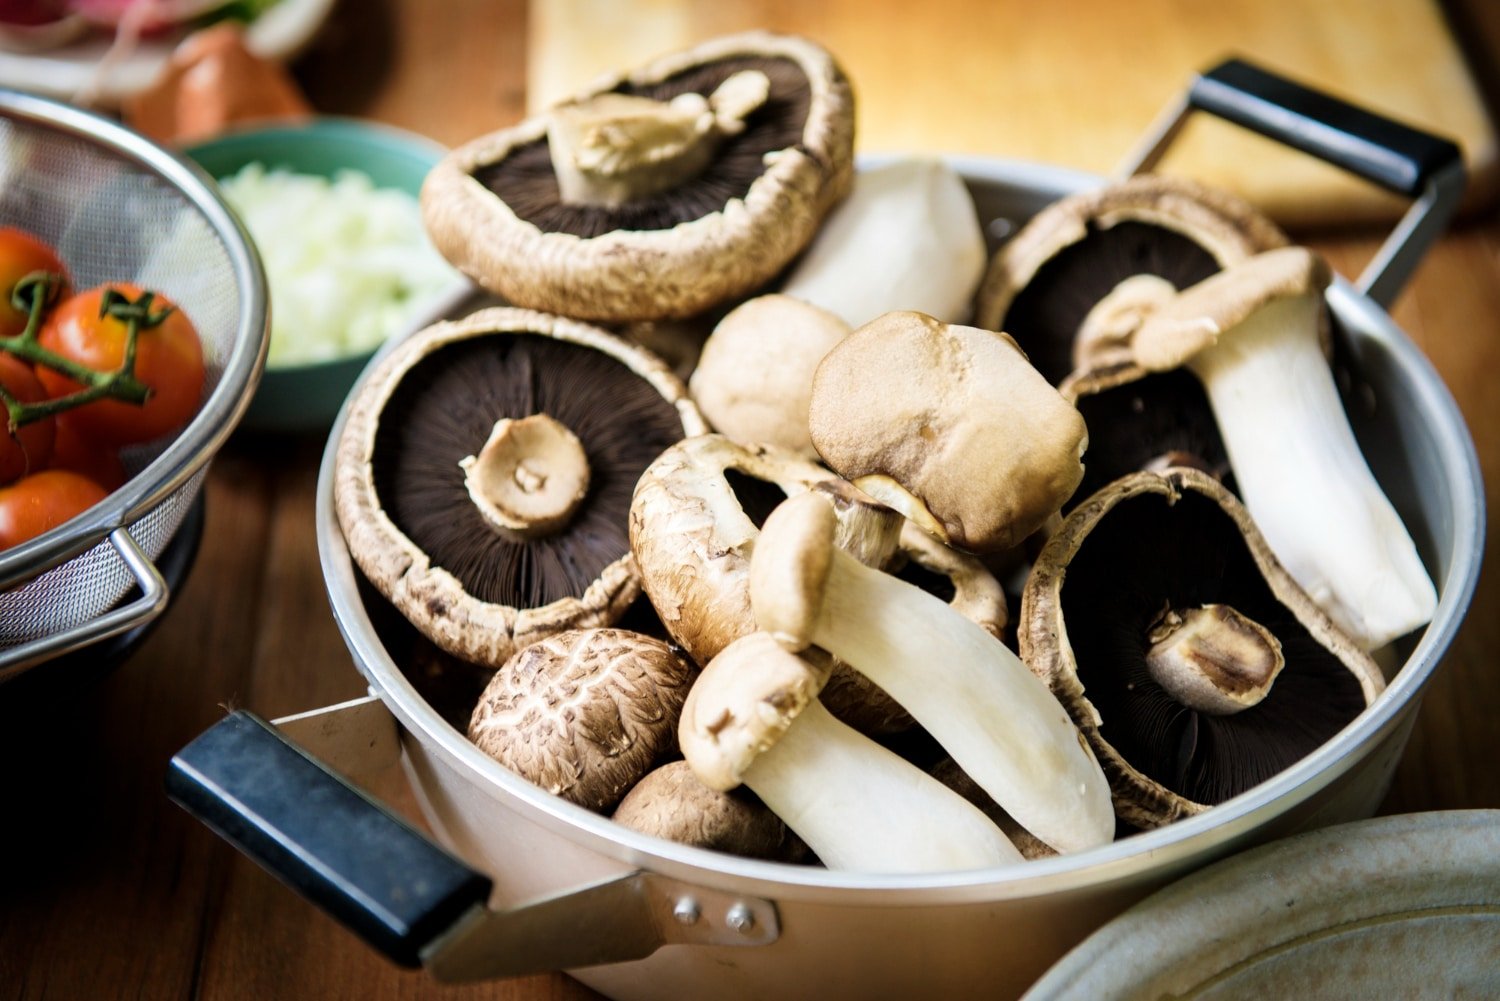 Grow Your Own Mushrooms With MushroomSupplies.com’s Cultivation Kits